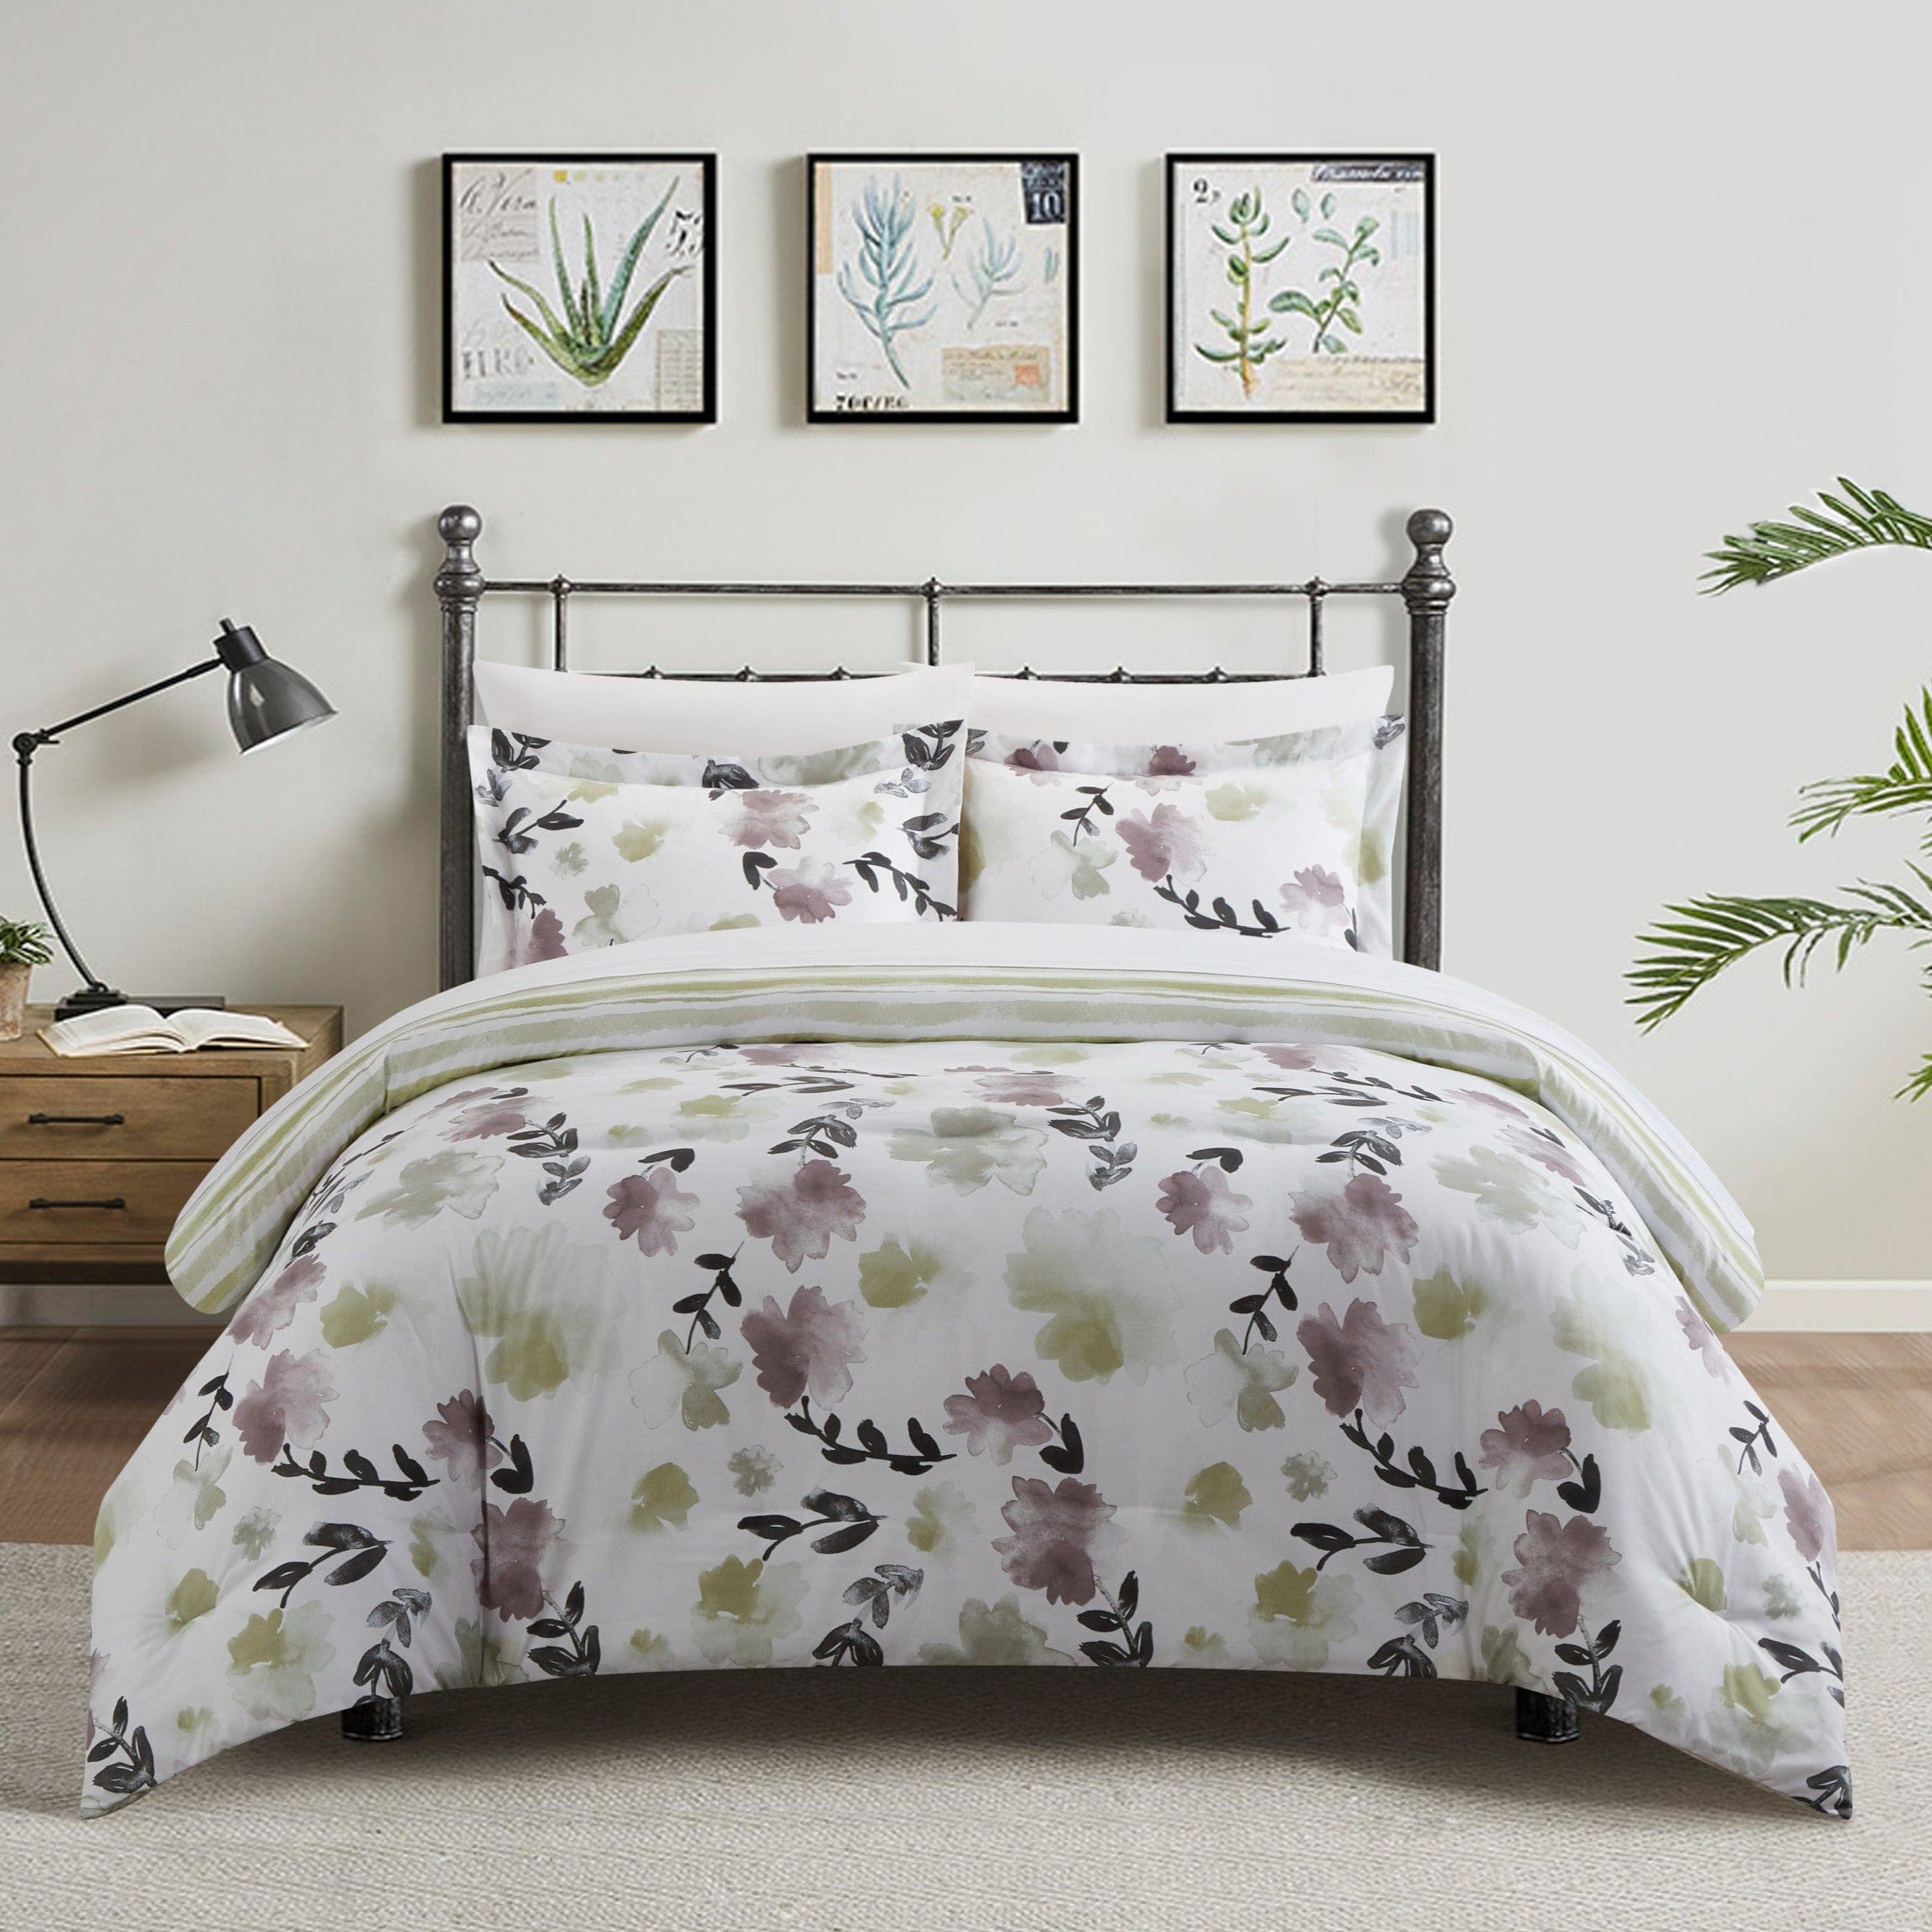 Chic Home Everly Green 3 Piece Reversible Floral Duvet Cover Set